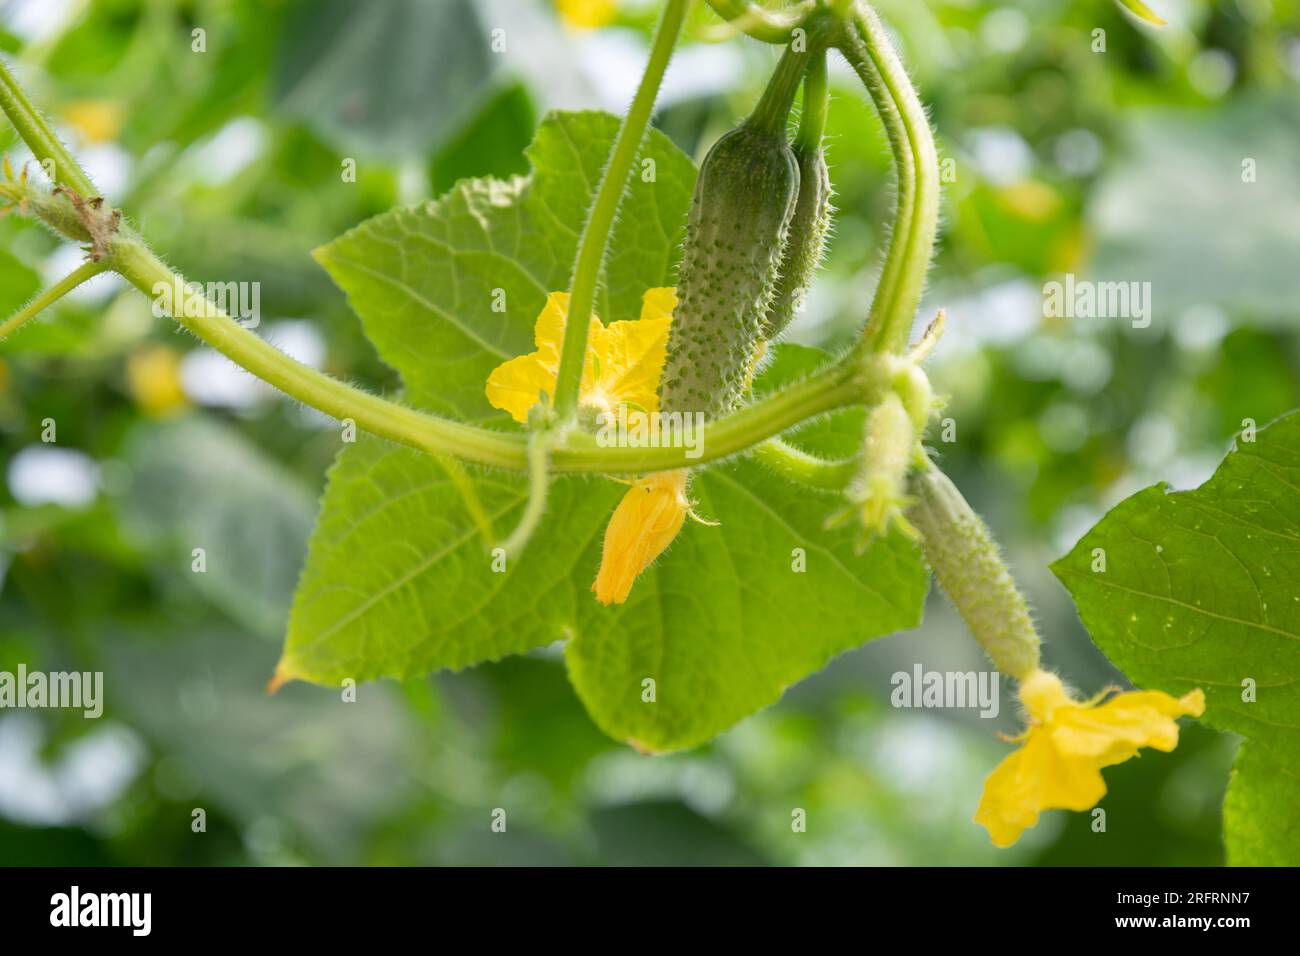 Ripe cucumber growing on the plant and bright new yellow flower Stock Photo